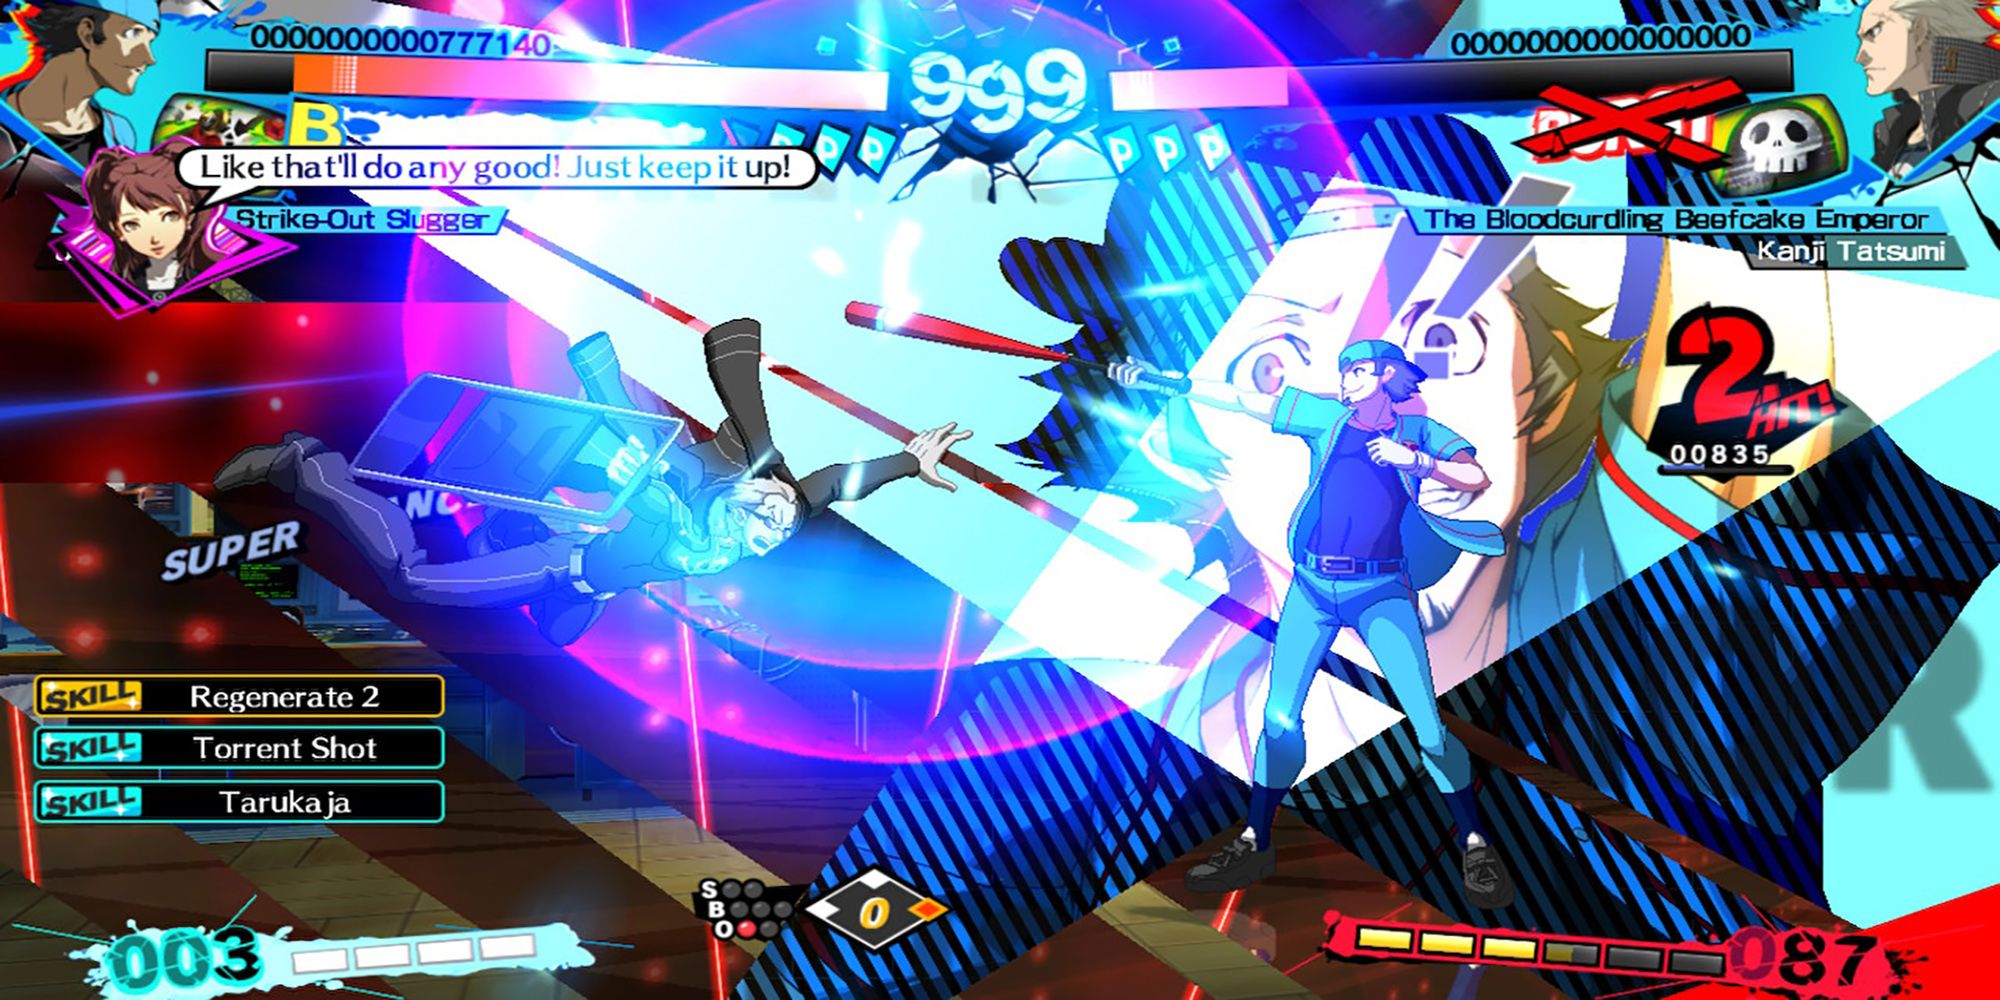 The game AI, playing as Junpei, annihilates Kanji in a battle in Golden Arena's Auto Mode. Persona 4 Arena Ultimax. 